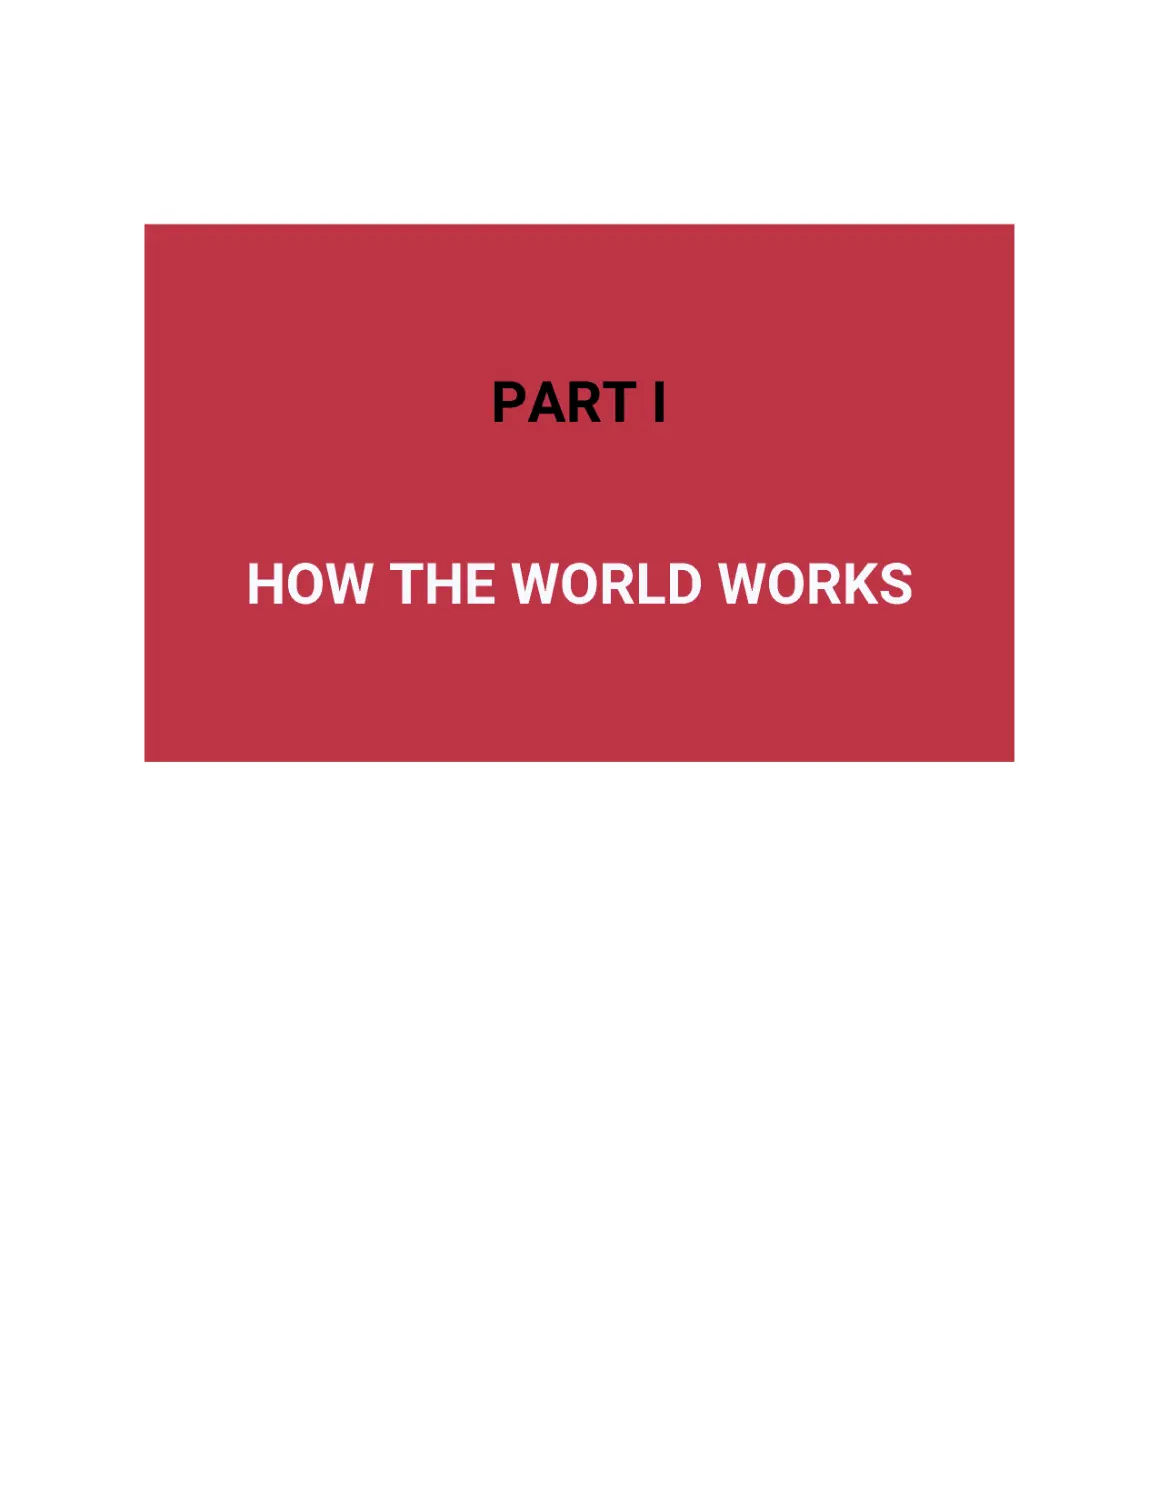 ﻿Part I: How the World Work